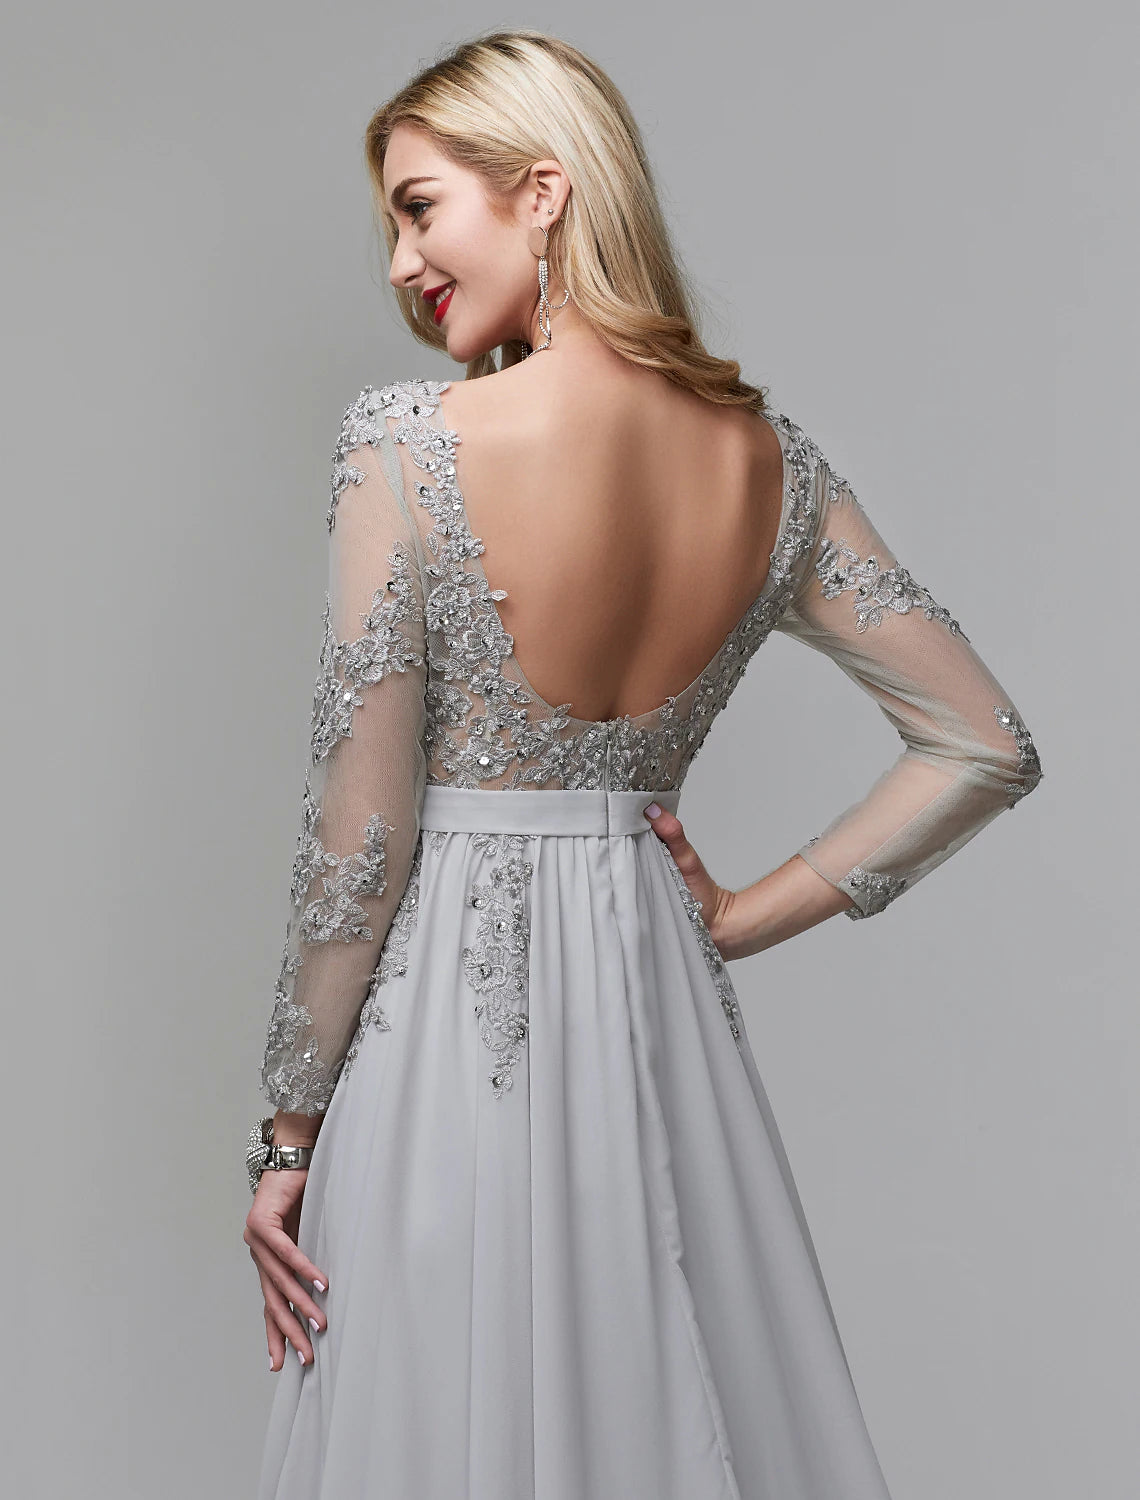 A-Line Luxurious Engagement Formal Evening Dress Illusion Neck V Back Low Back Long Sleeve Chapel Train Chiffon with Sequin Appliques